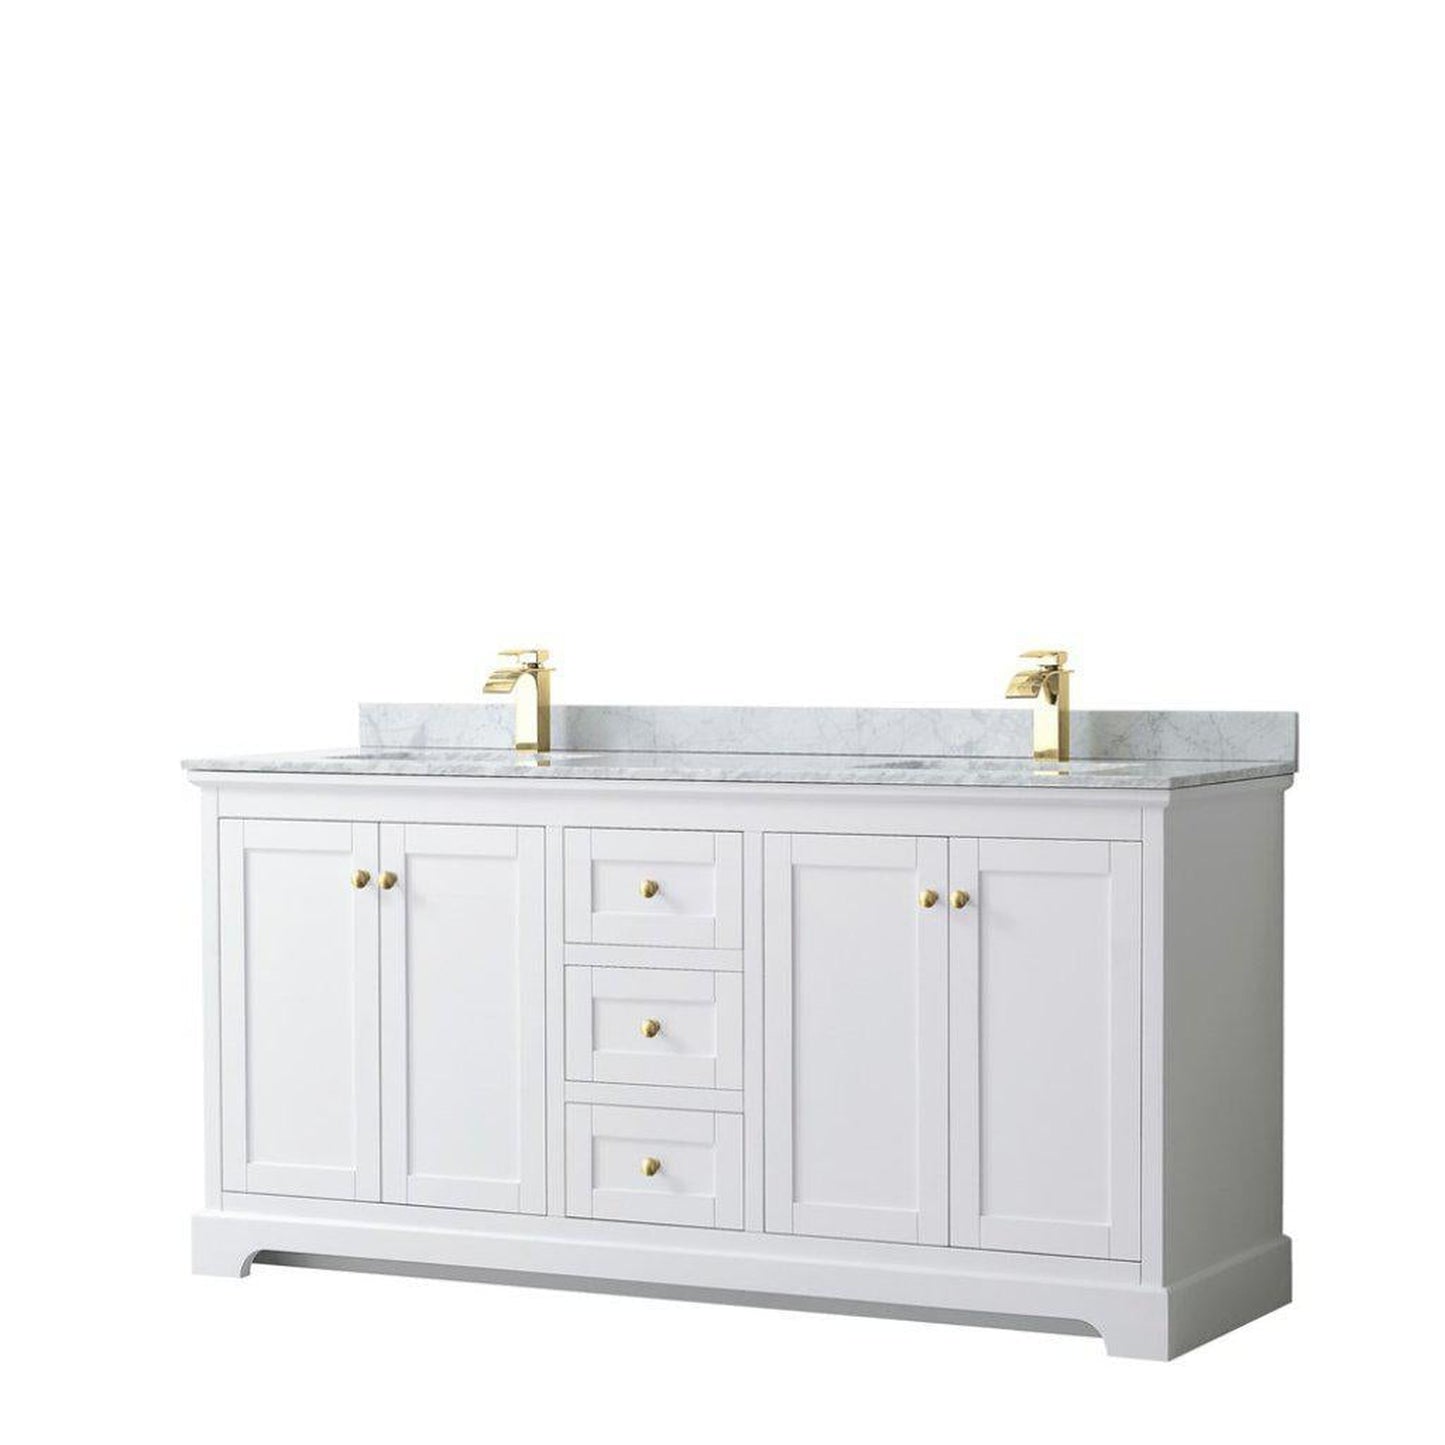 Wyndham Collection Avery 72" White Double Bathroom Vanity, White Carrara Marble Countertop With 1-Hole Faucet, Square Sink, Gold Trims